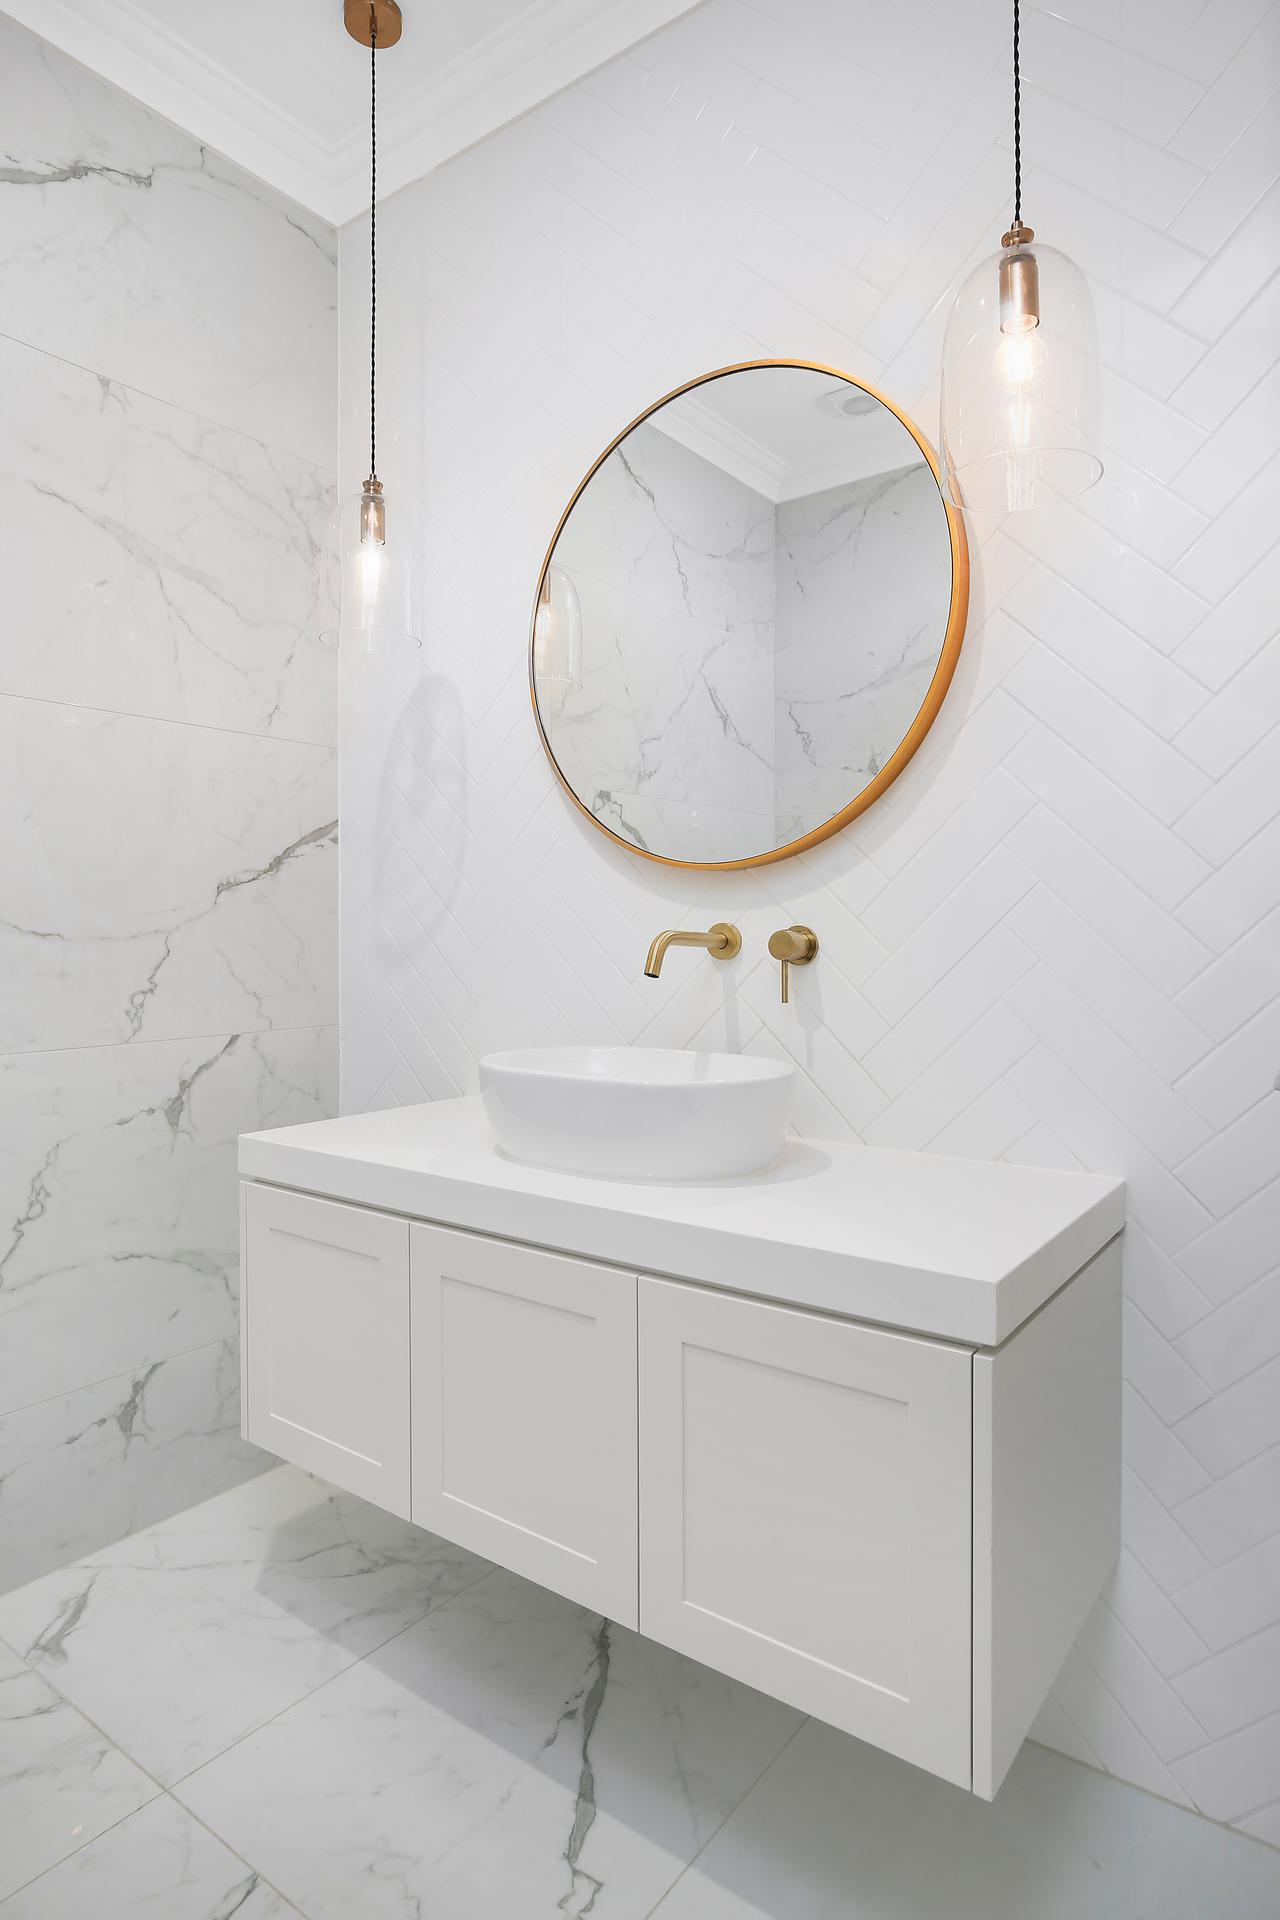 Shaker Style vanity with over-mount sink - Georges Hall, Sydney